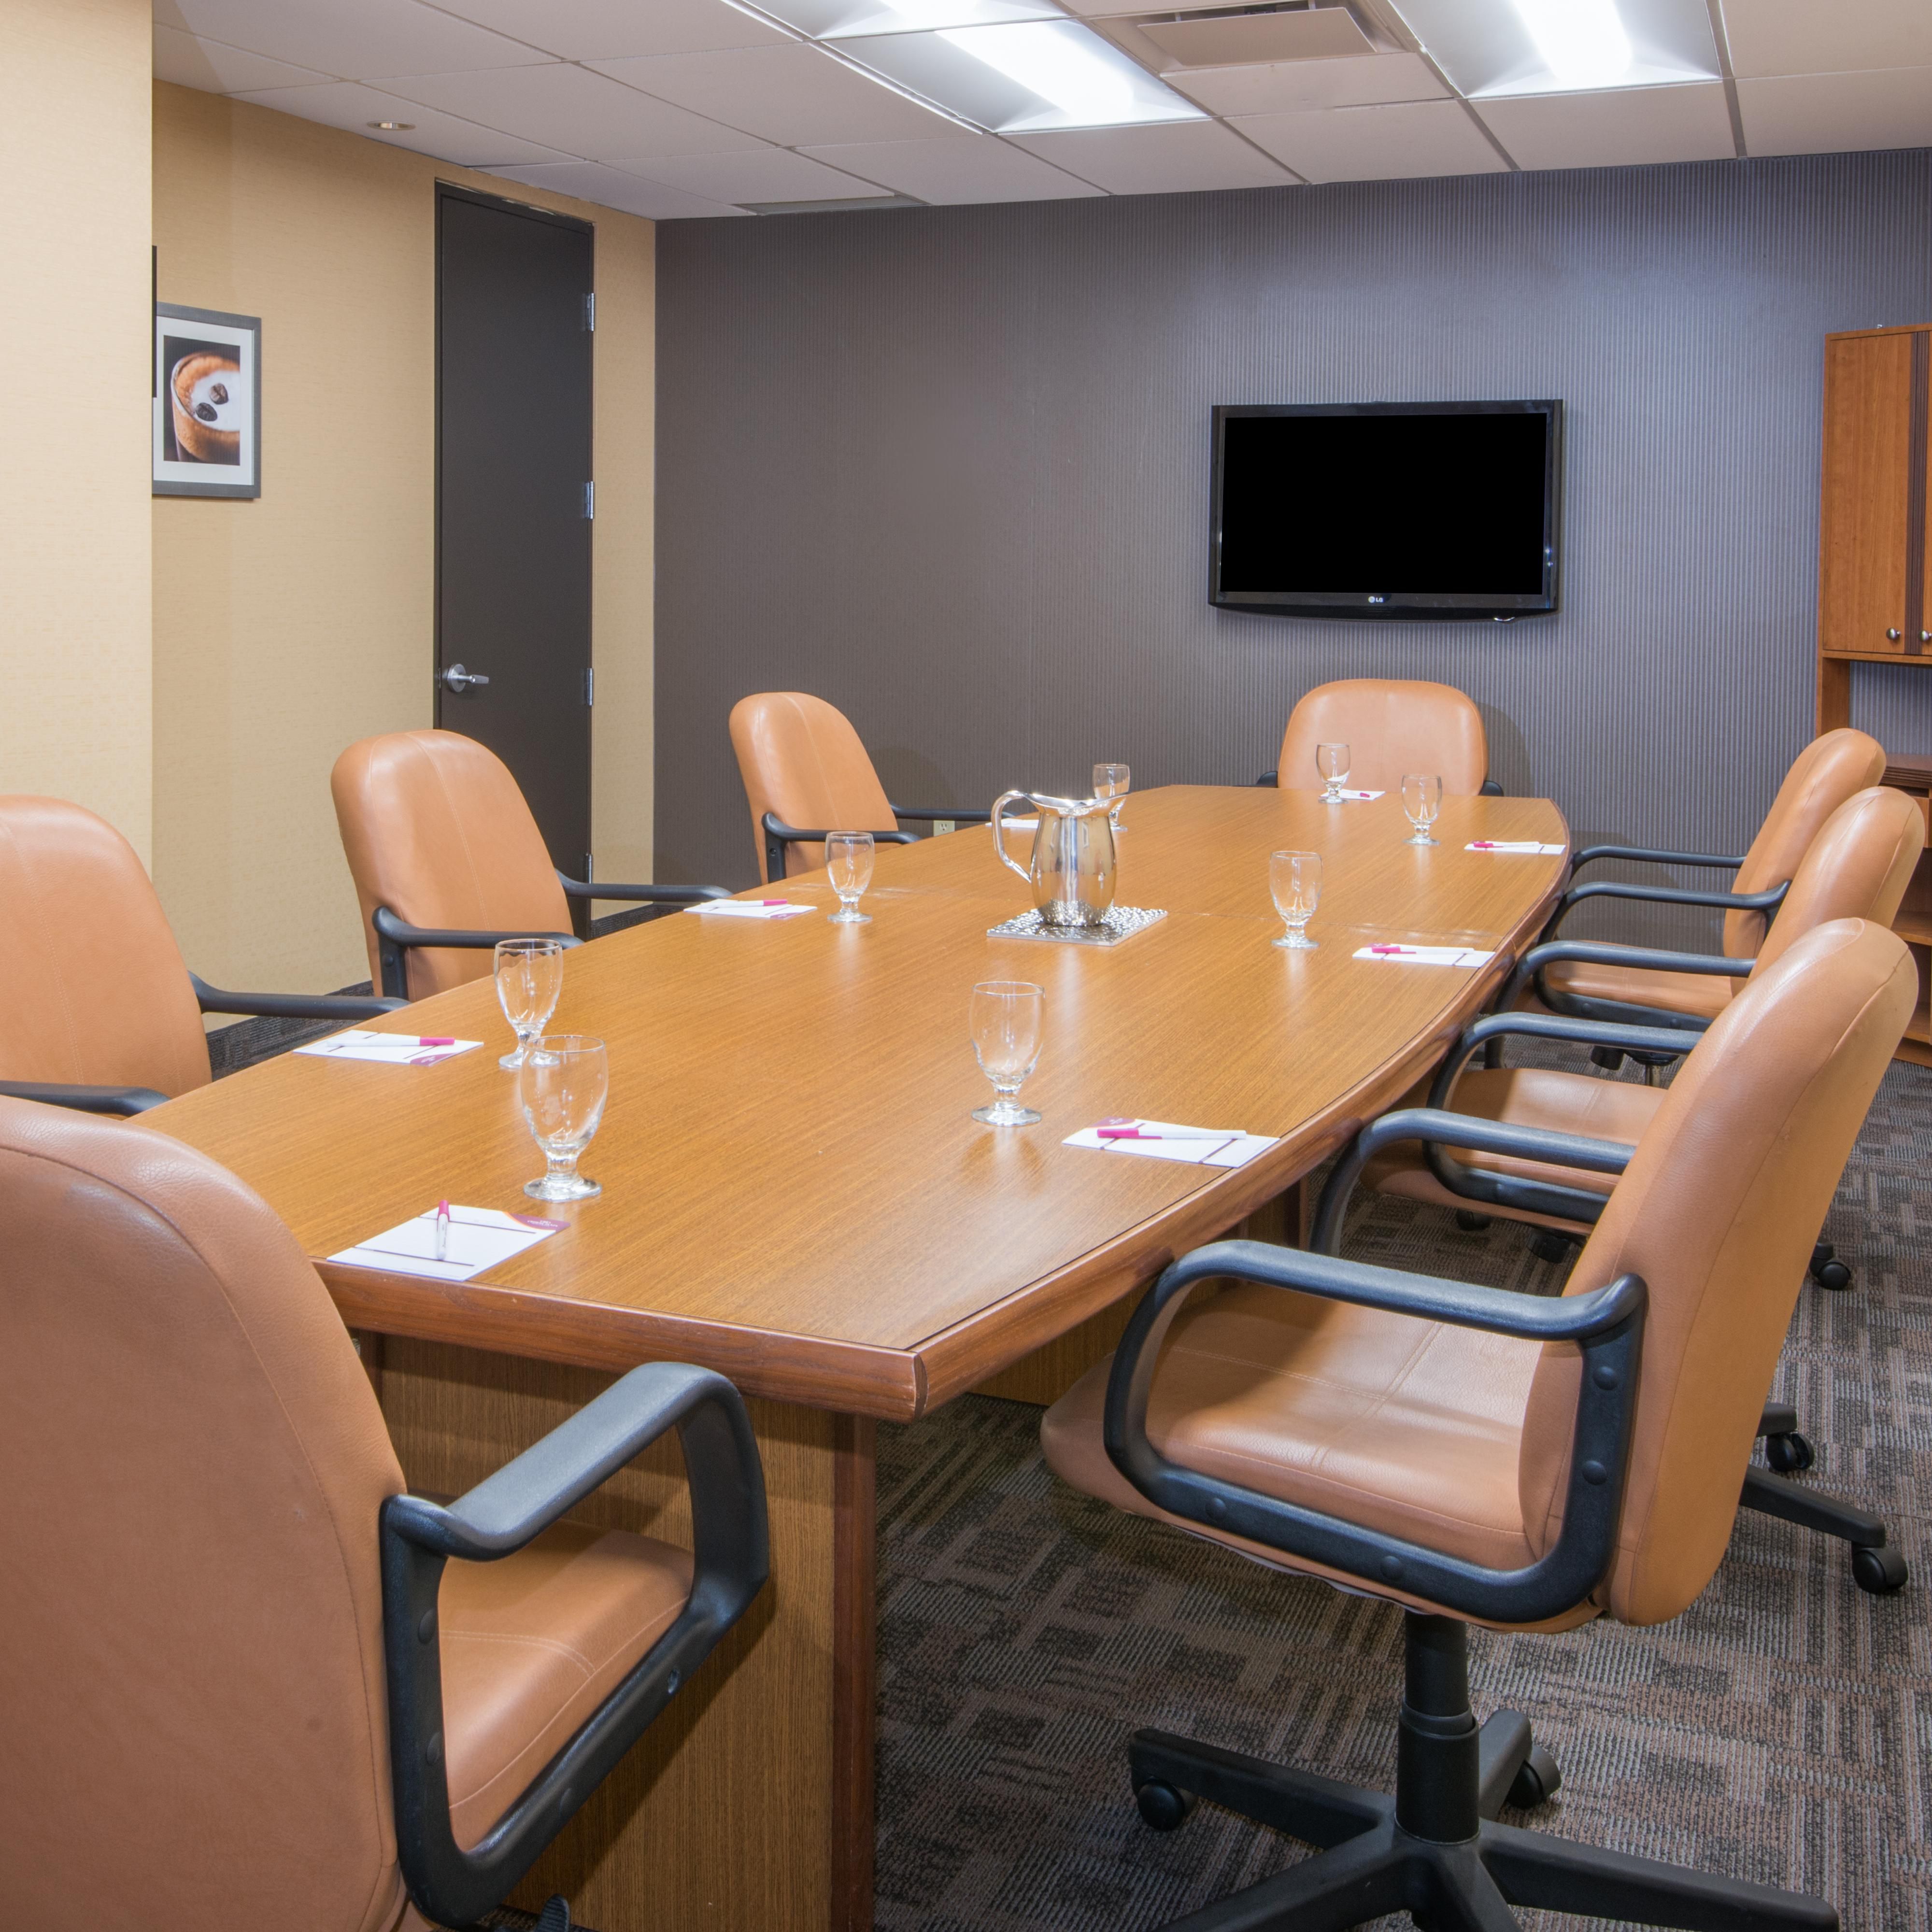 Crowne Plaza Kitchener is your ideal venue for small meetings